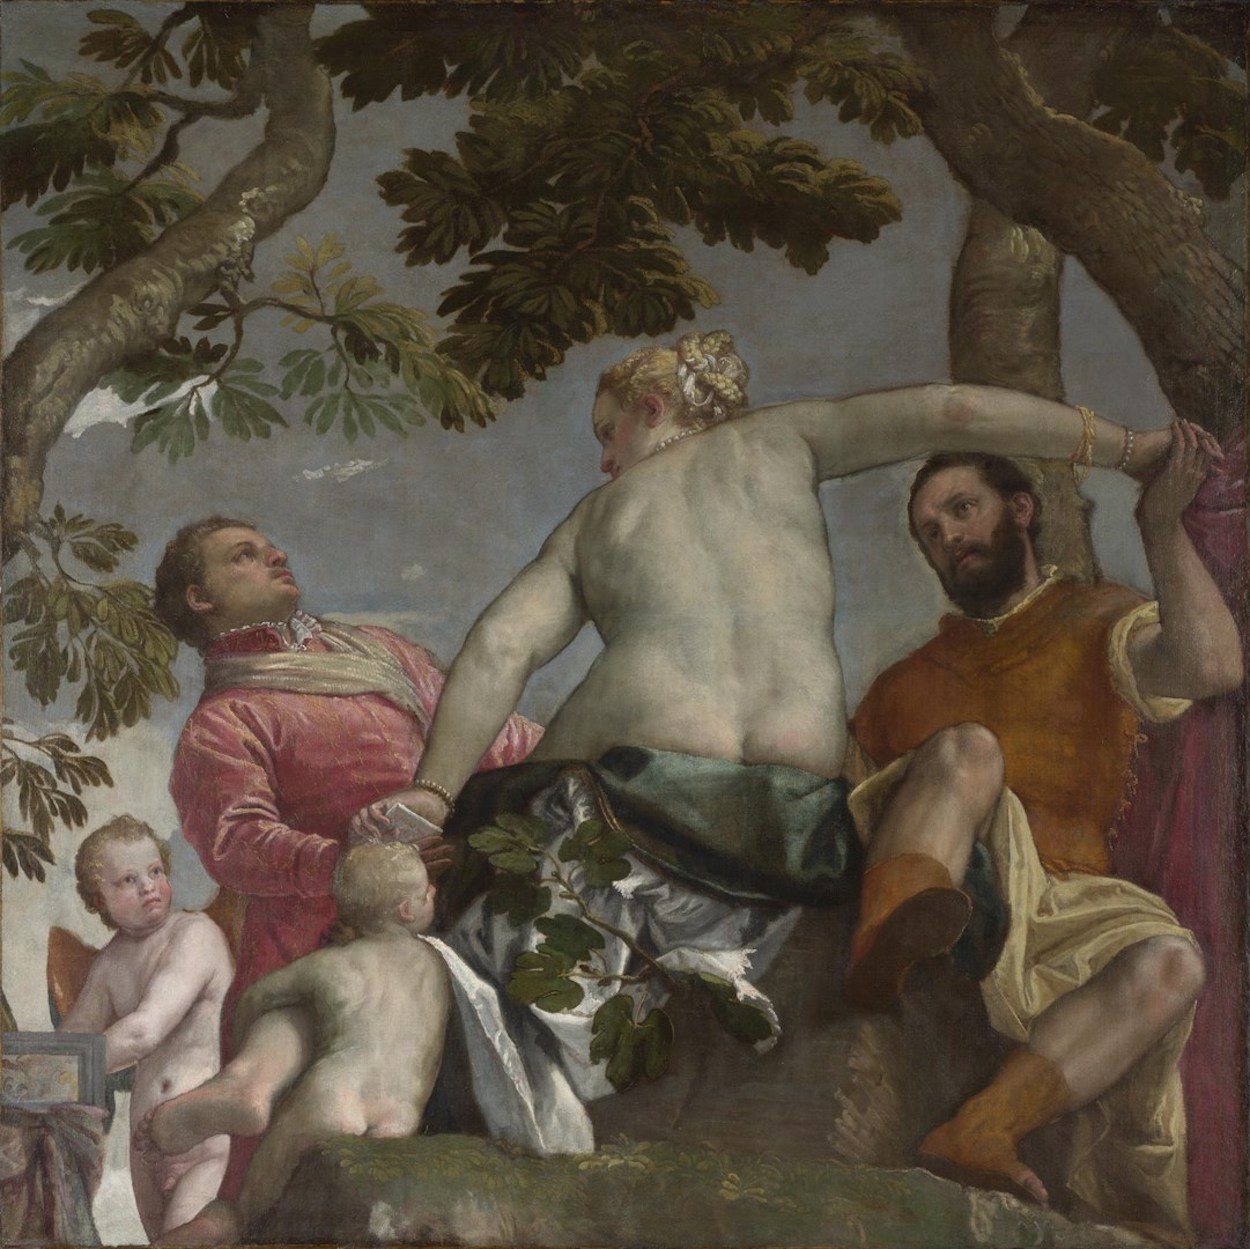 Unfaithfulness by Paolo Veronese - about 1575 - 189.9 x 189.9 cm National Gallery